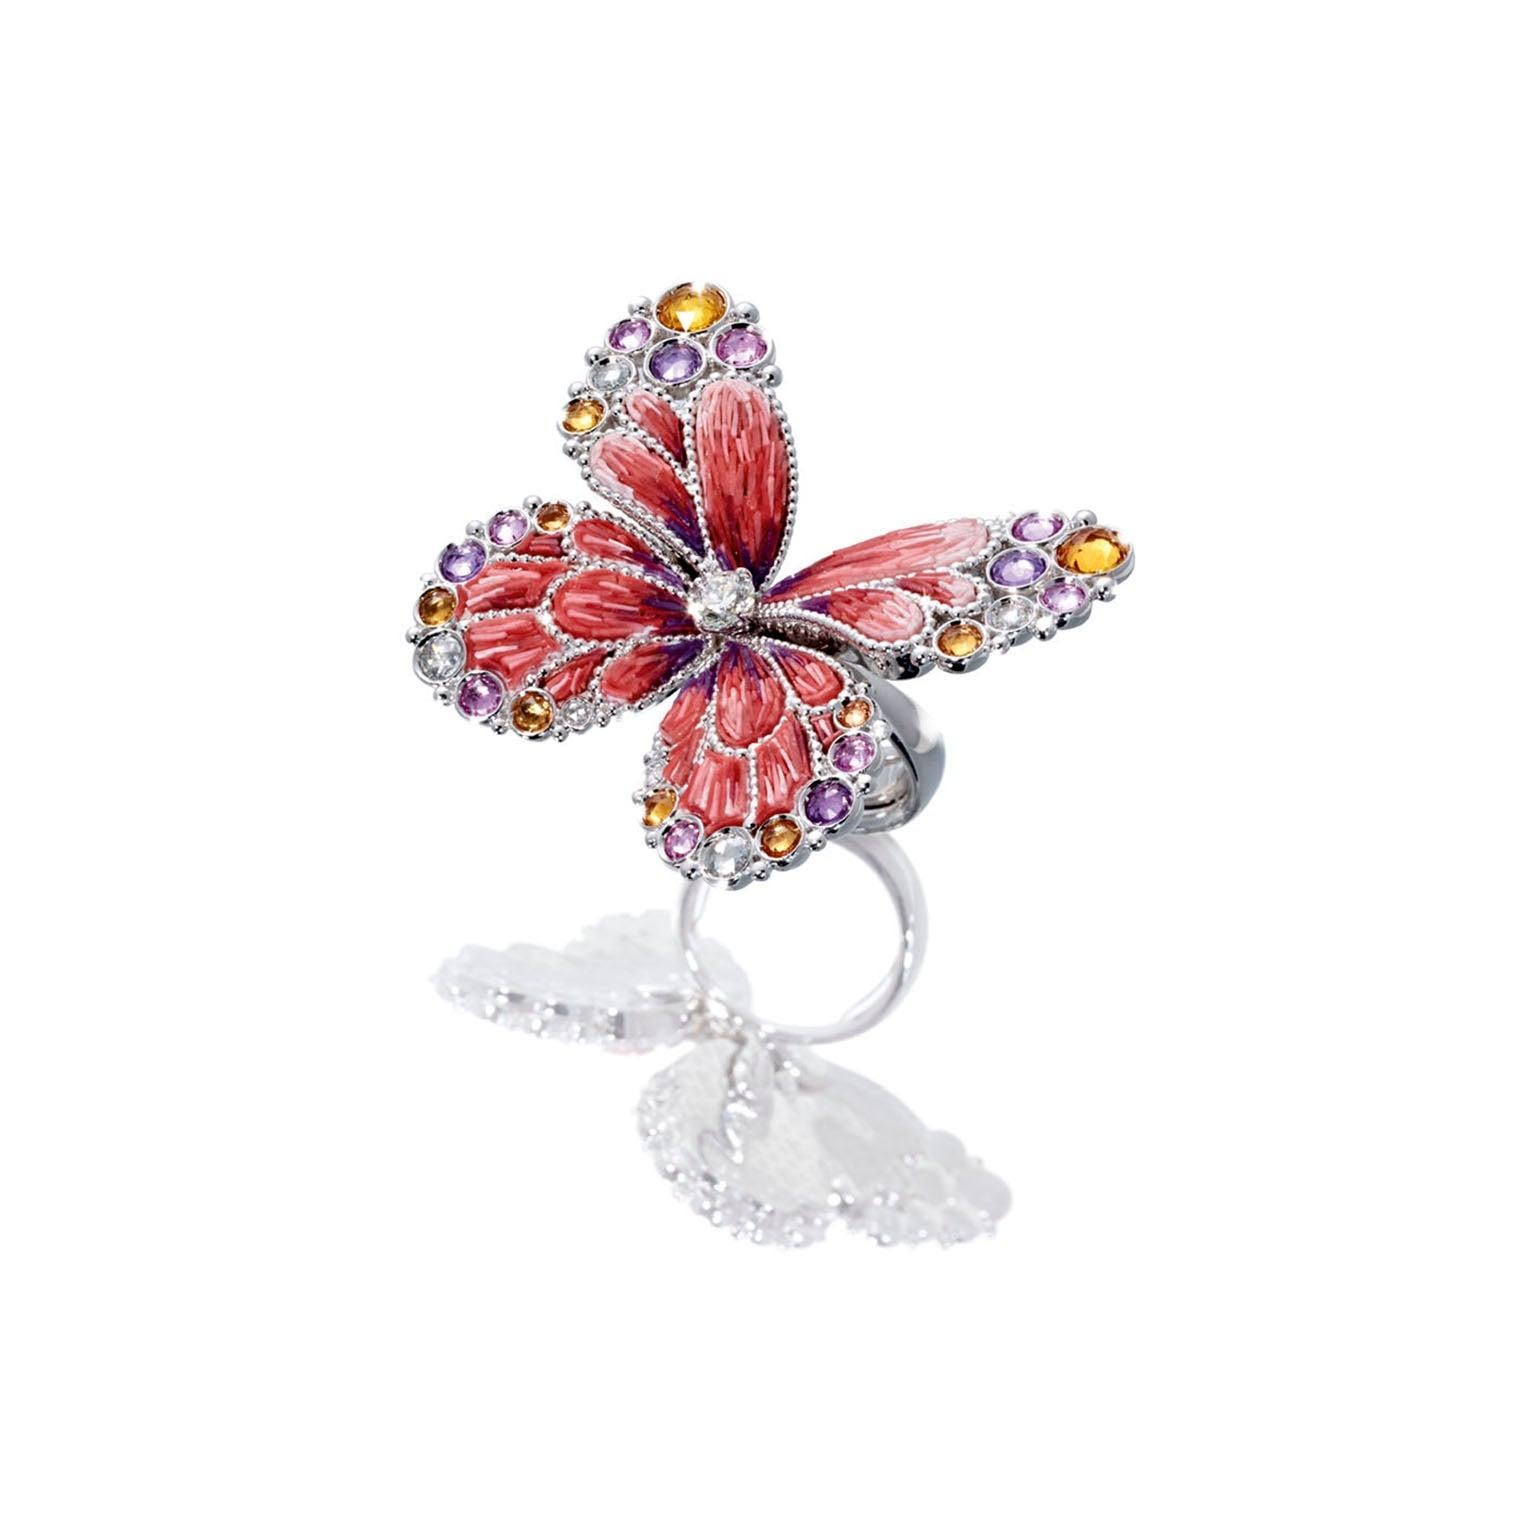 For Sale:  Stylish Cocktail Ring White Diamonds White Gold Multicolor Sapphires Micromosaic 2